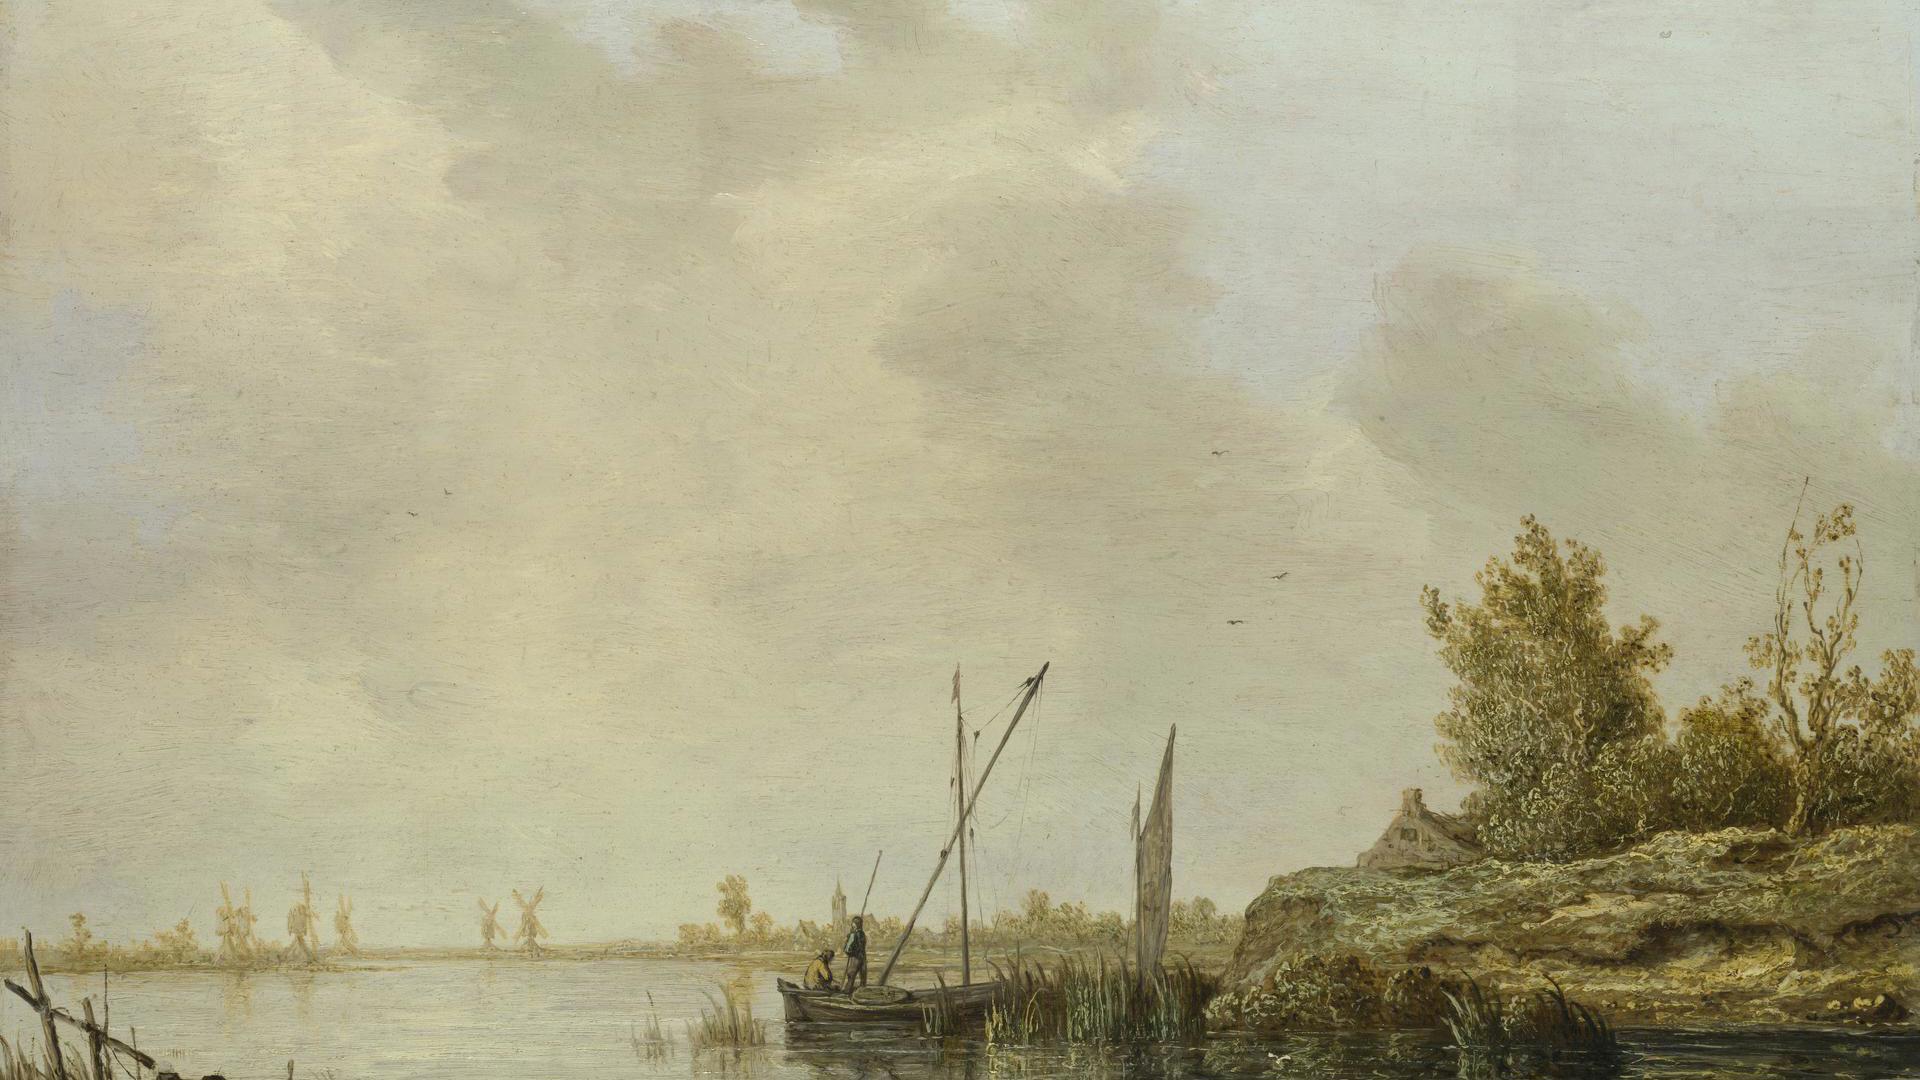 A River Scene with Distant Windmills by Aelbert Cuyp